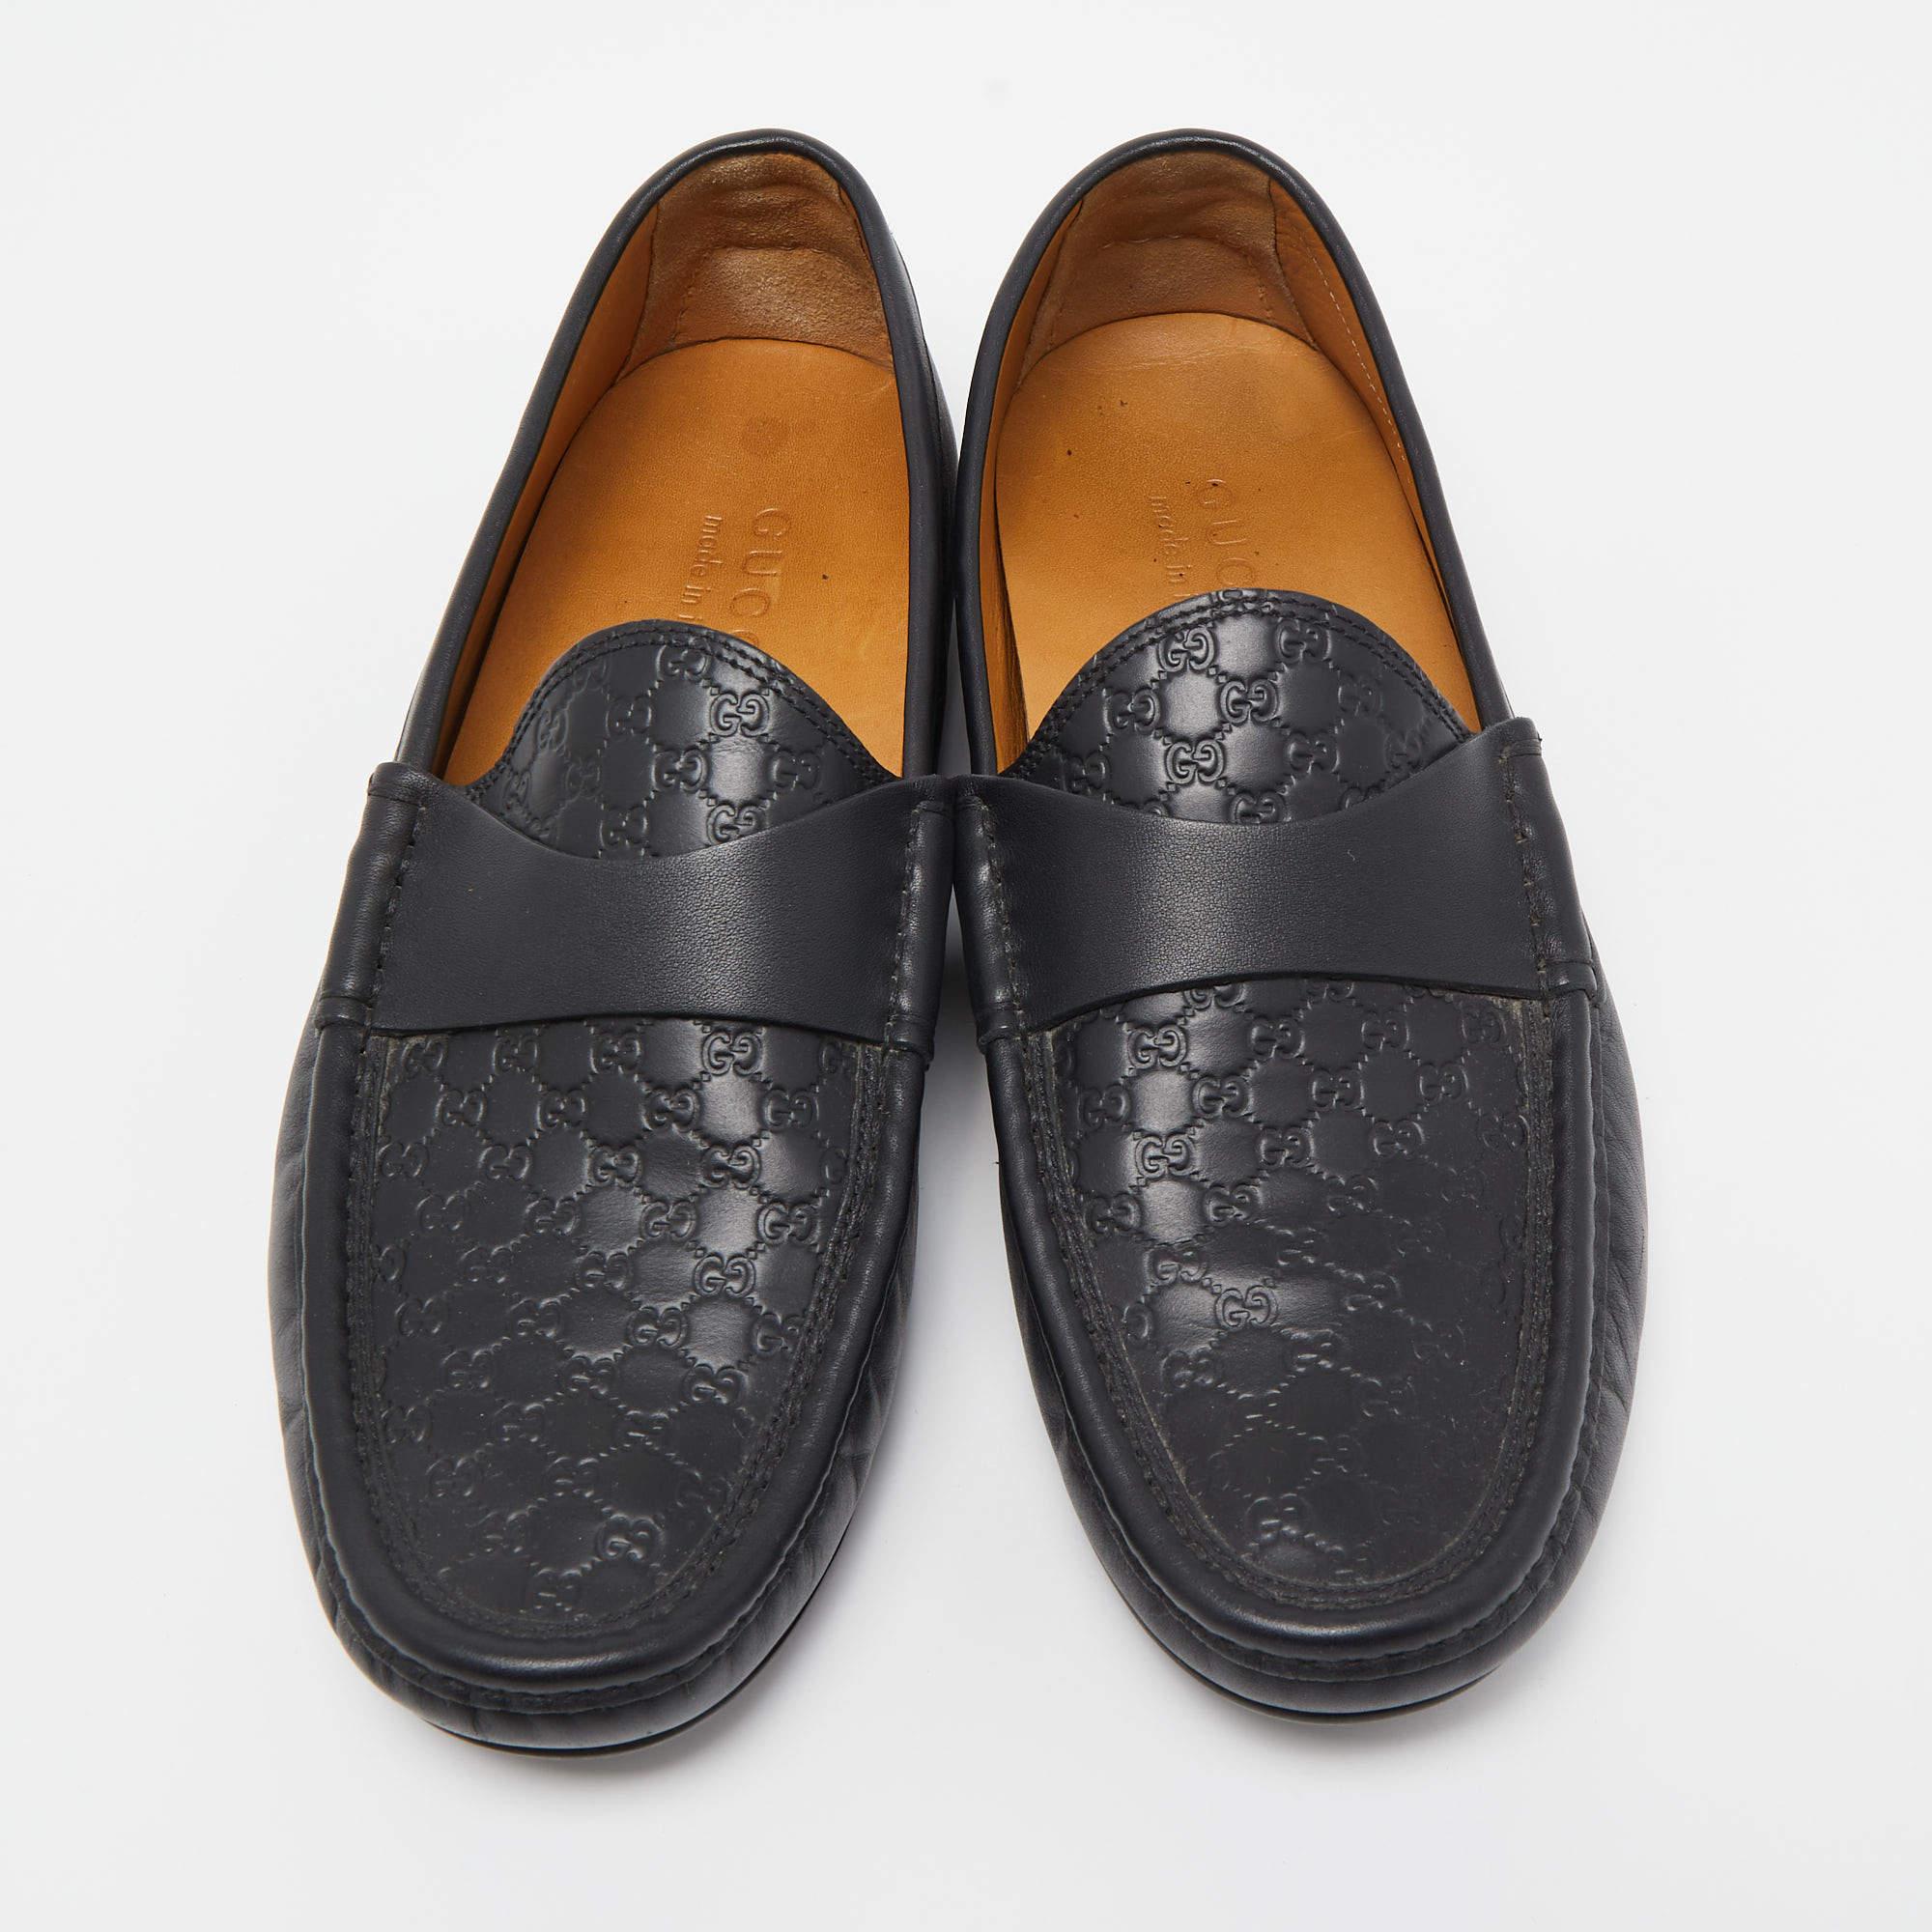 Practical, fashionable, and durable—these designer loafers are carefully built to be fine companions to your everyday style. They come made using the best materials to be a prized buy.

